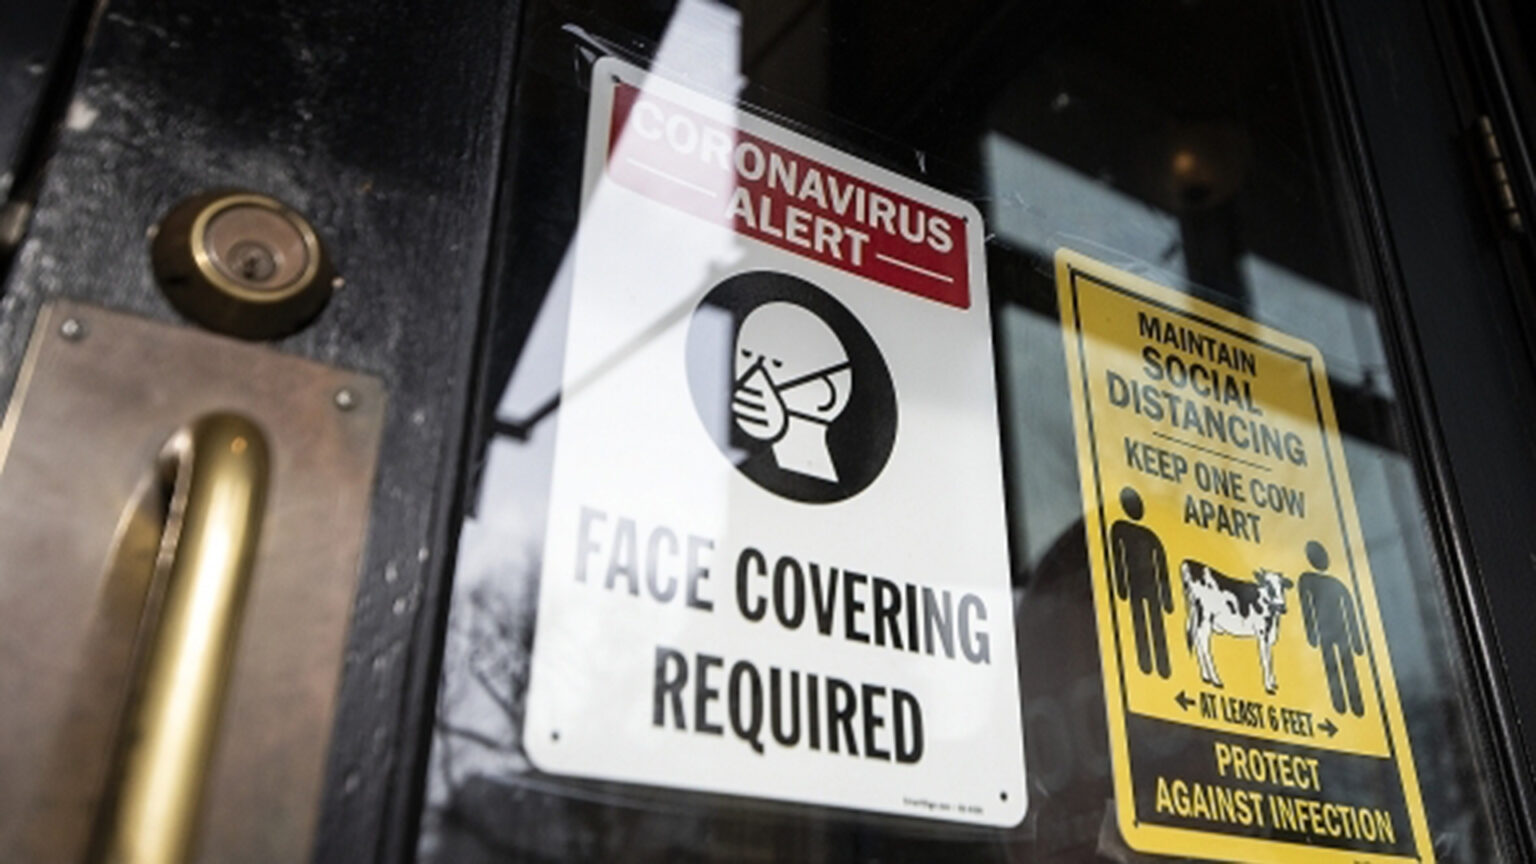 Signs on a business's doorway instruct patrons that face coverings are required and to maintain social distance of 6 feet (or one cow length) apart.